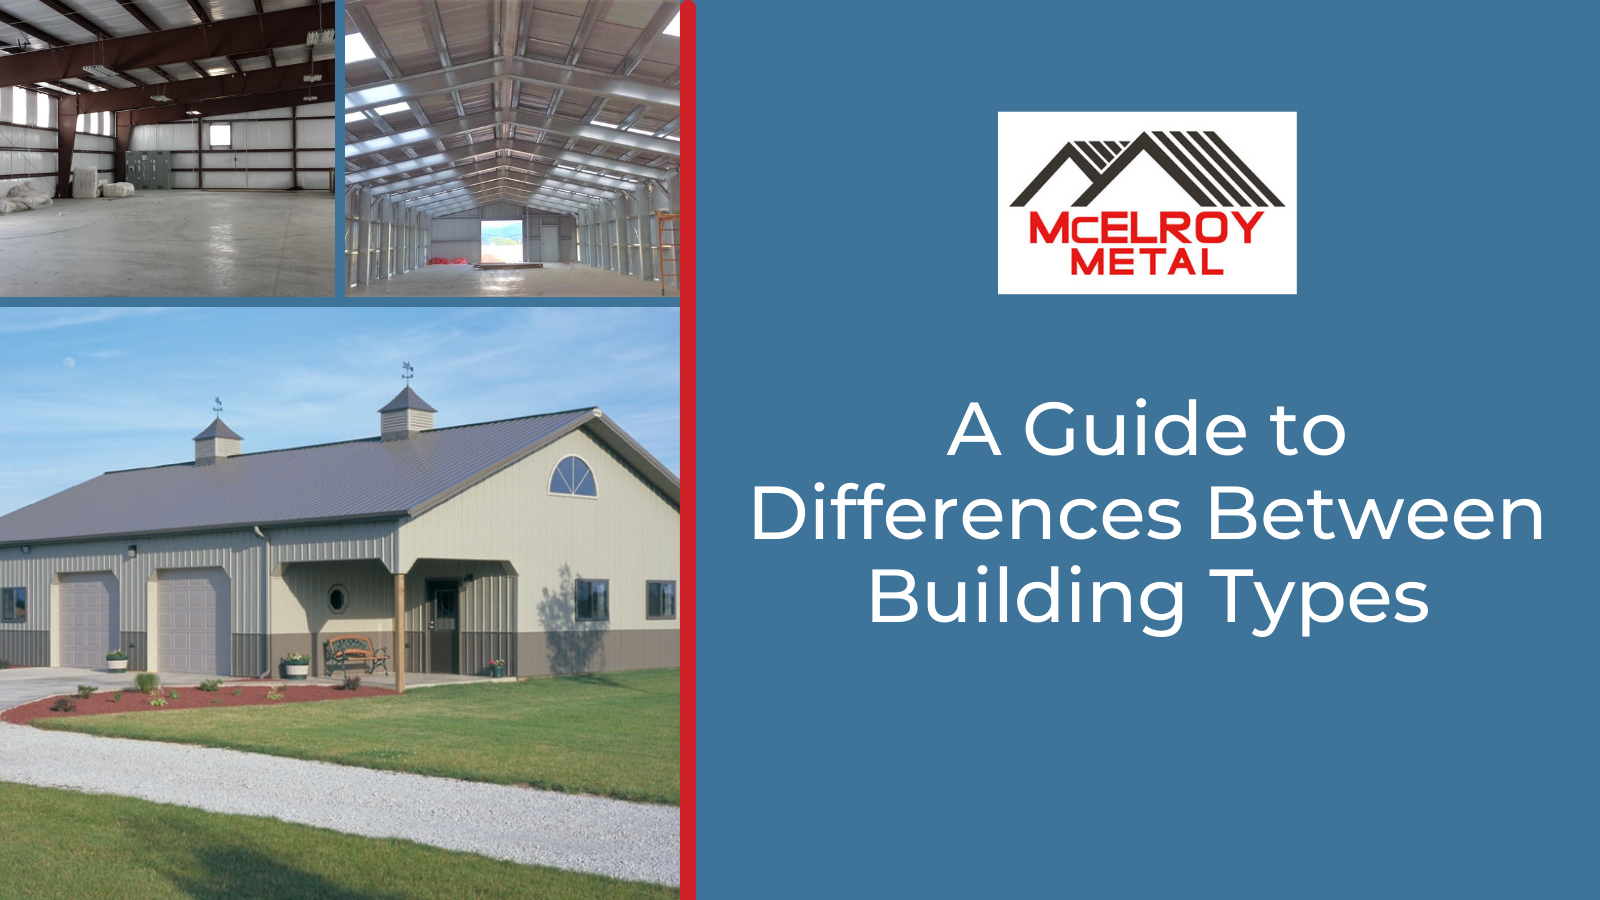 A Guide to Differences Between Building Types